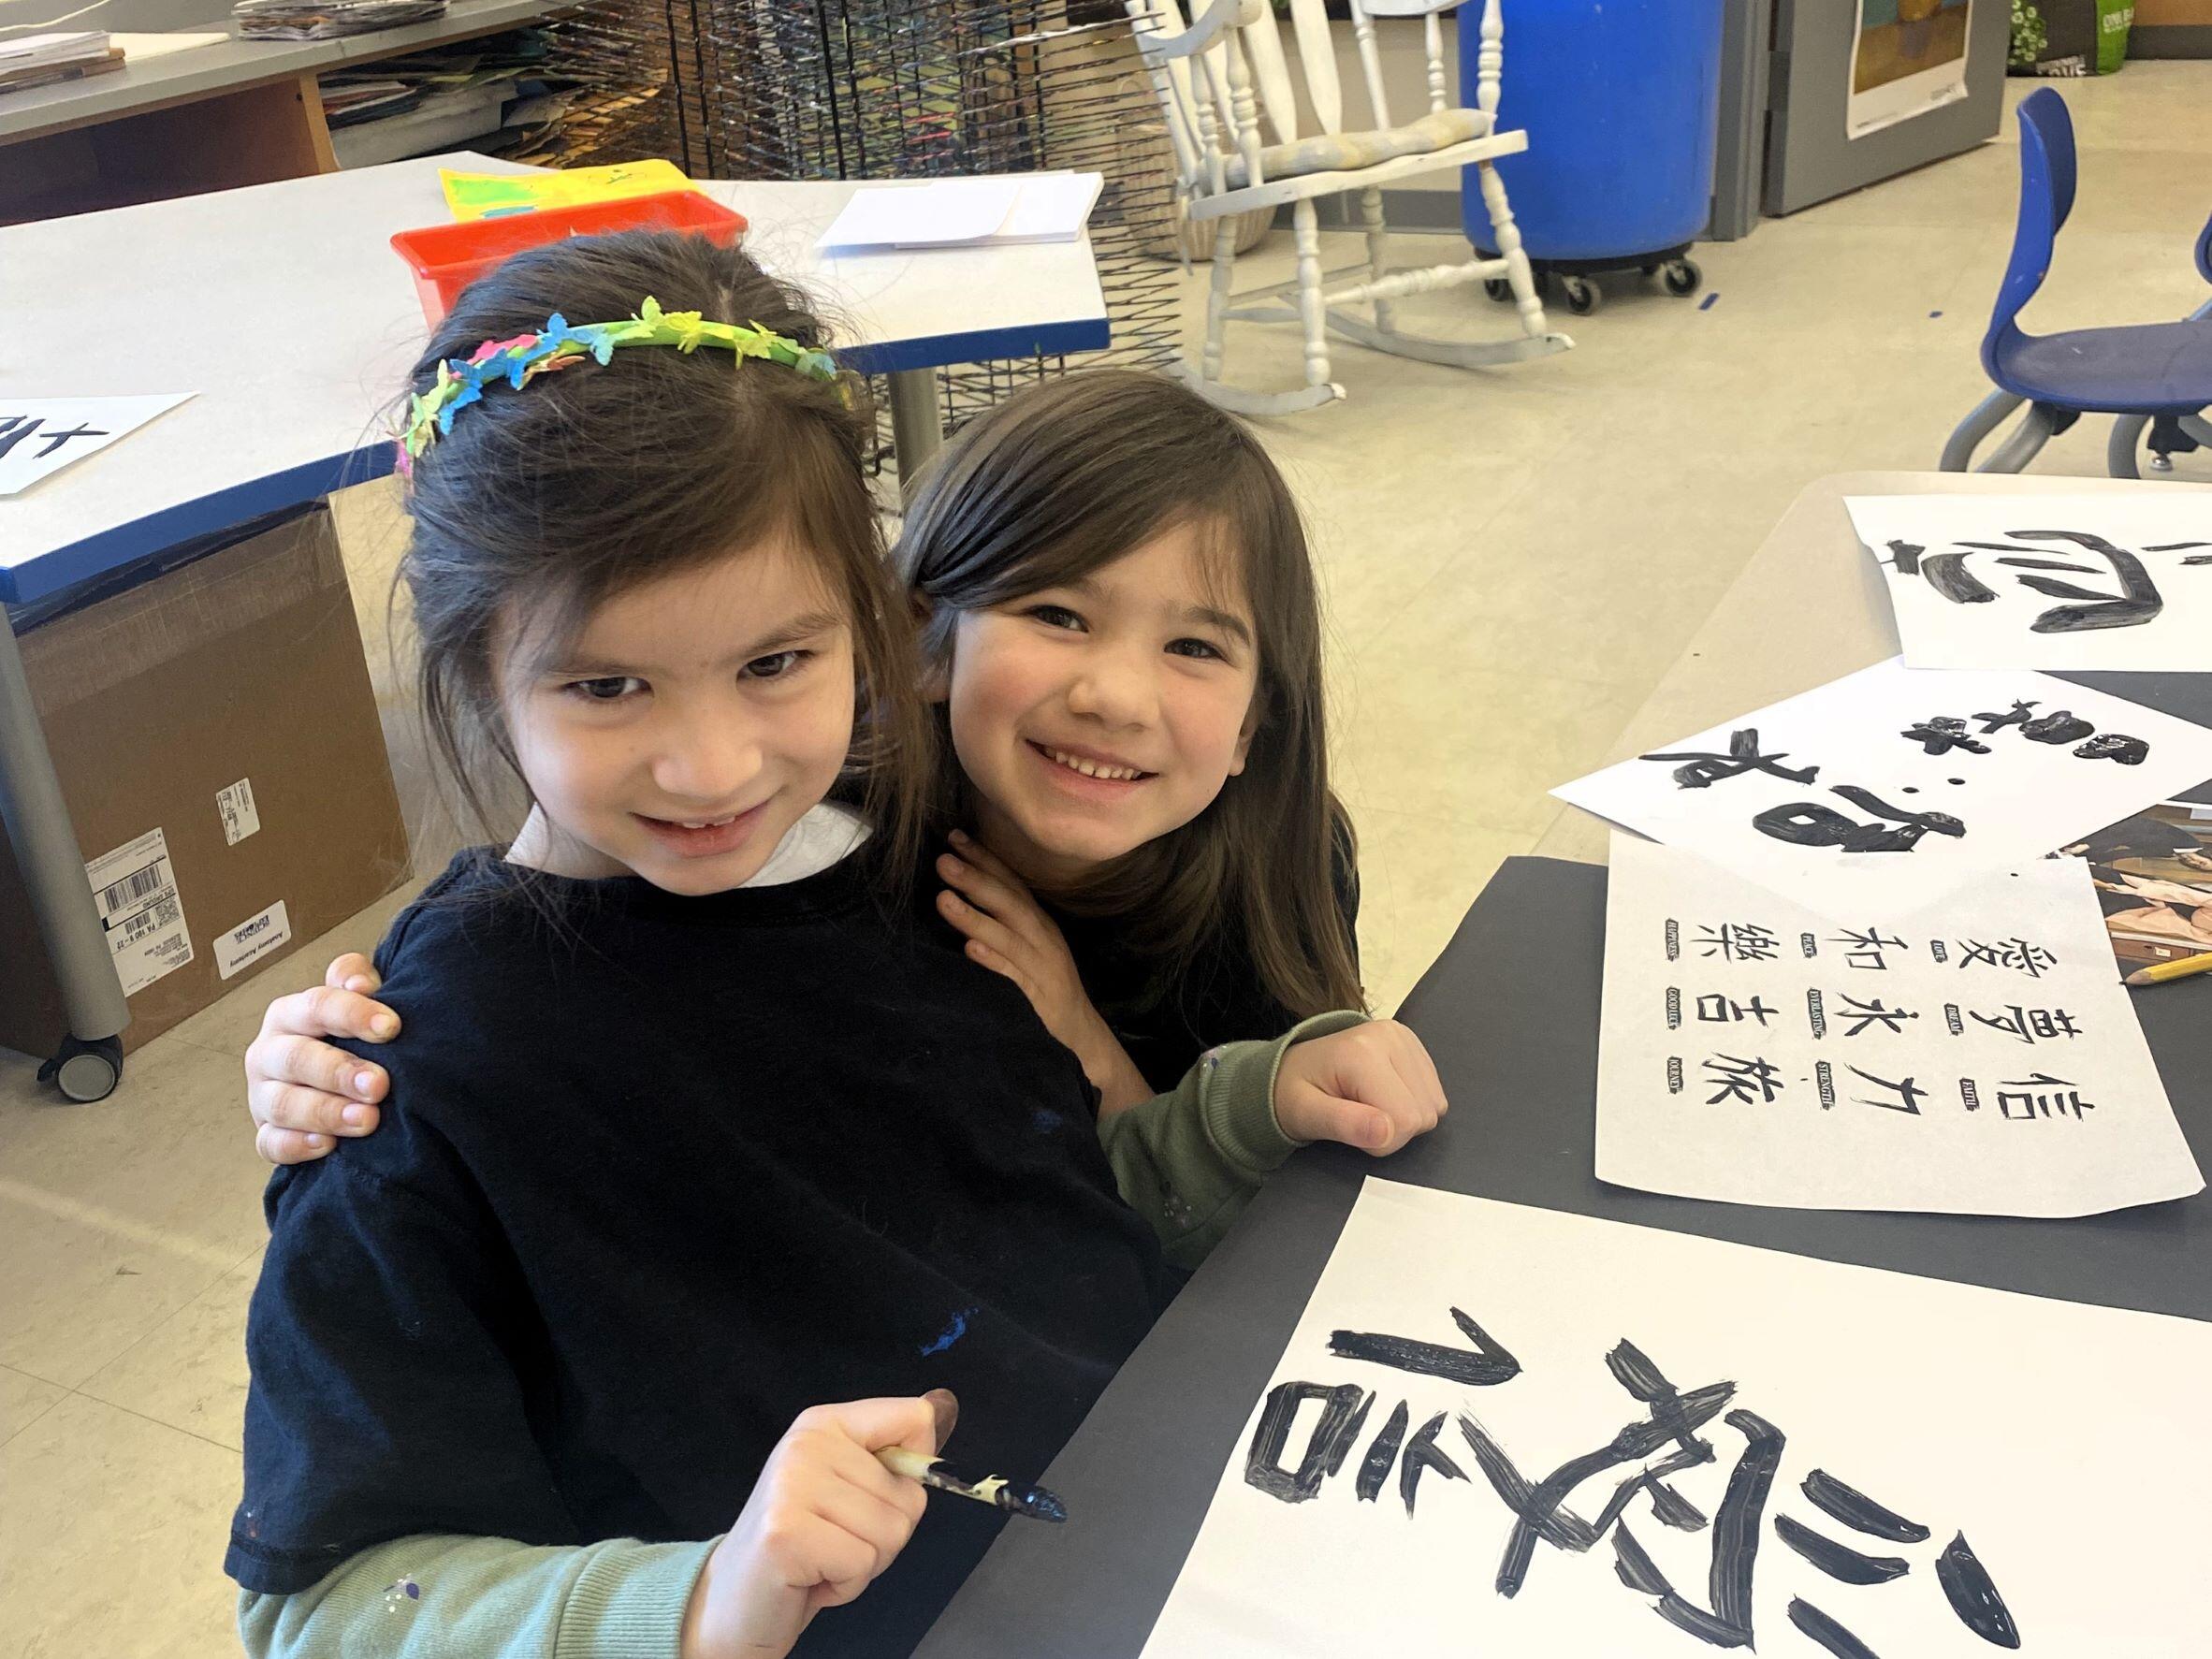 Enf- Two students wearing black smocks painting Chinese words on paper